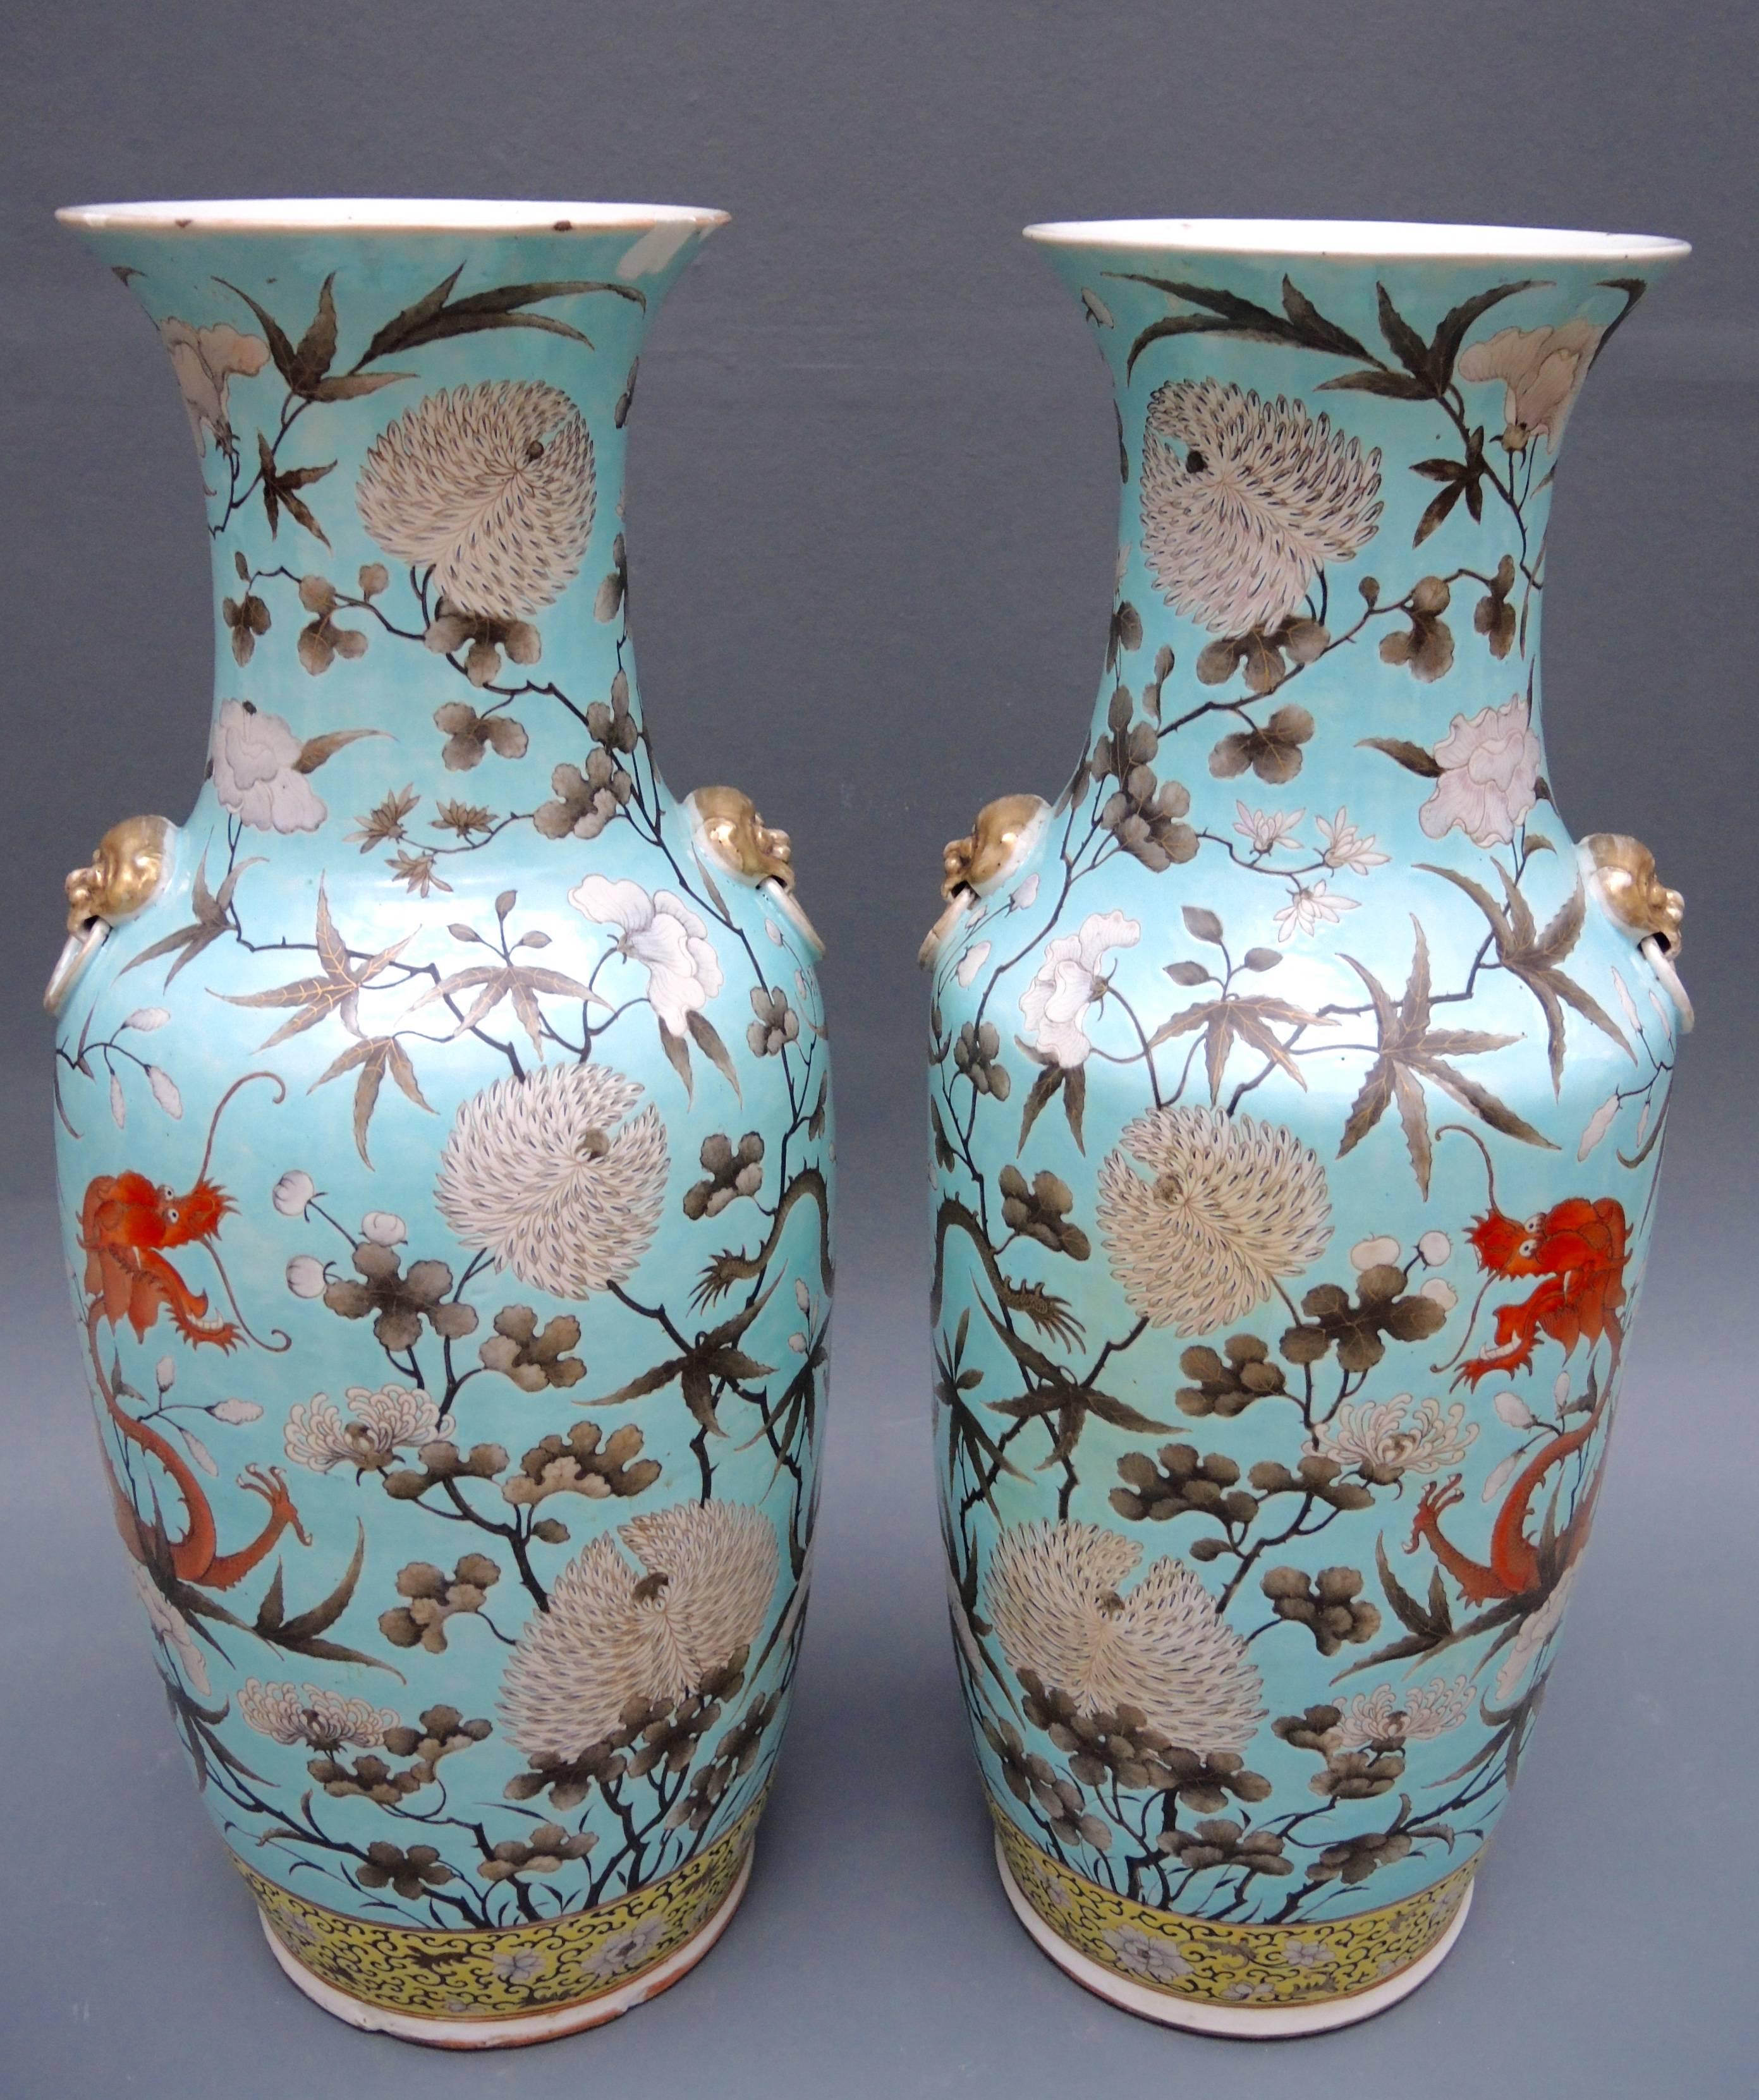 A striking pair of Chinese baluster vases in the most unusual turquoise blue color. Wild orange and brown dragons dance among vines and chrysanthemum blooms. One vase has chips to the base and top lip.
 